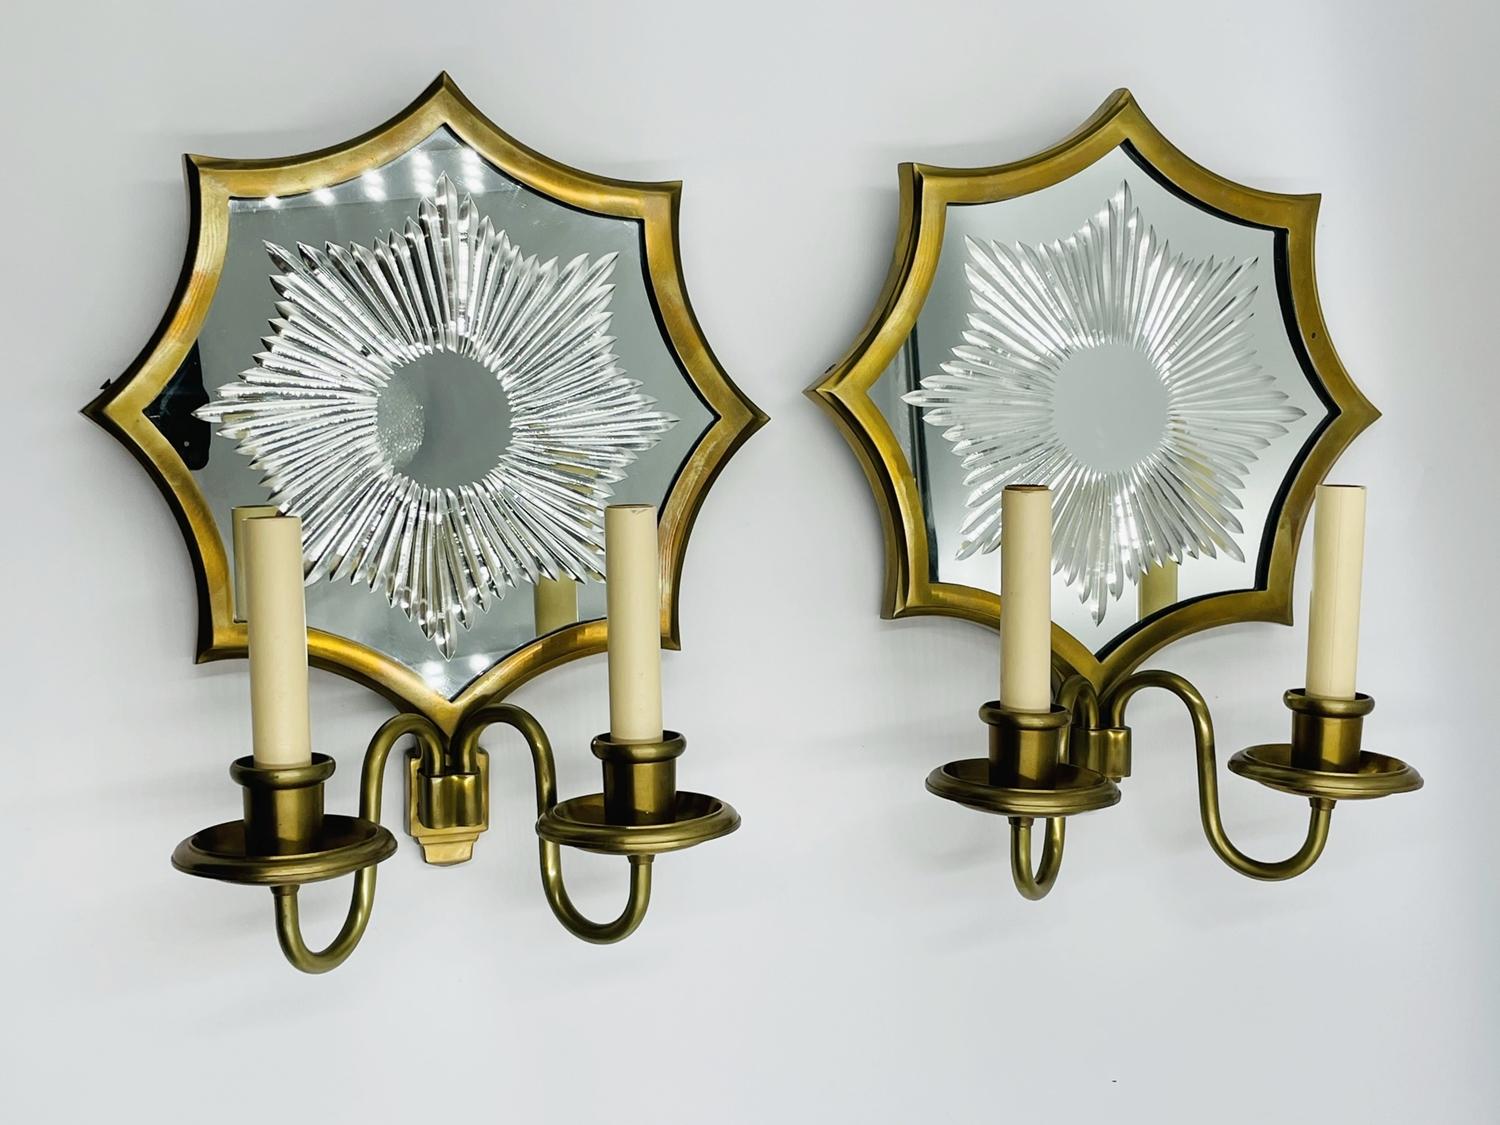 English Pair of Solid Brass & Mirror Wall Sconces, E. F. Caldwell Attb